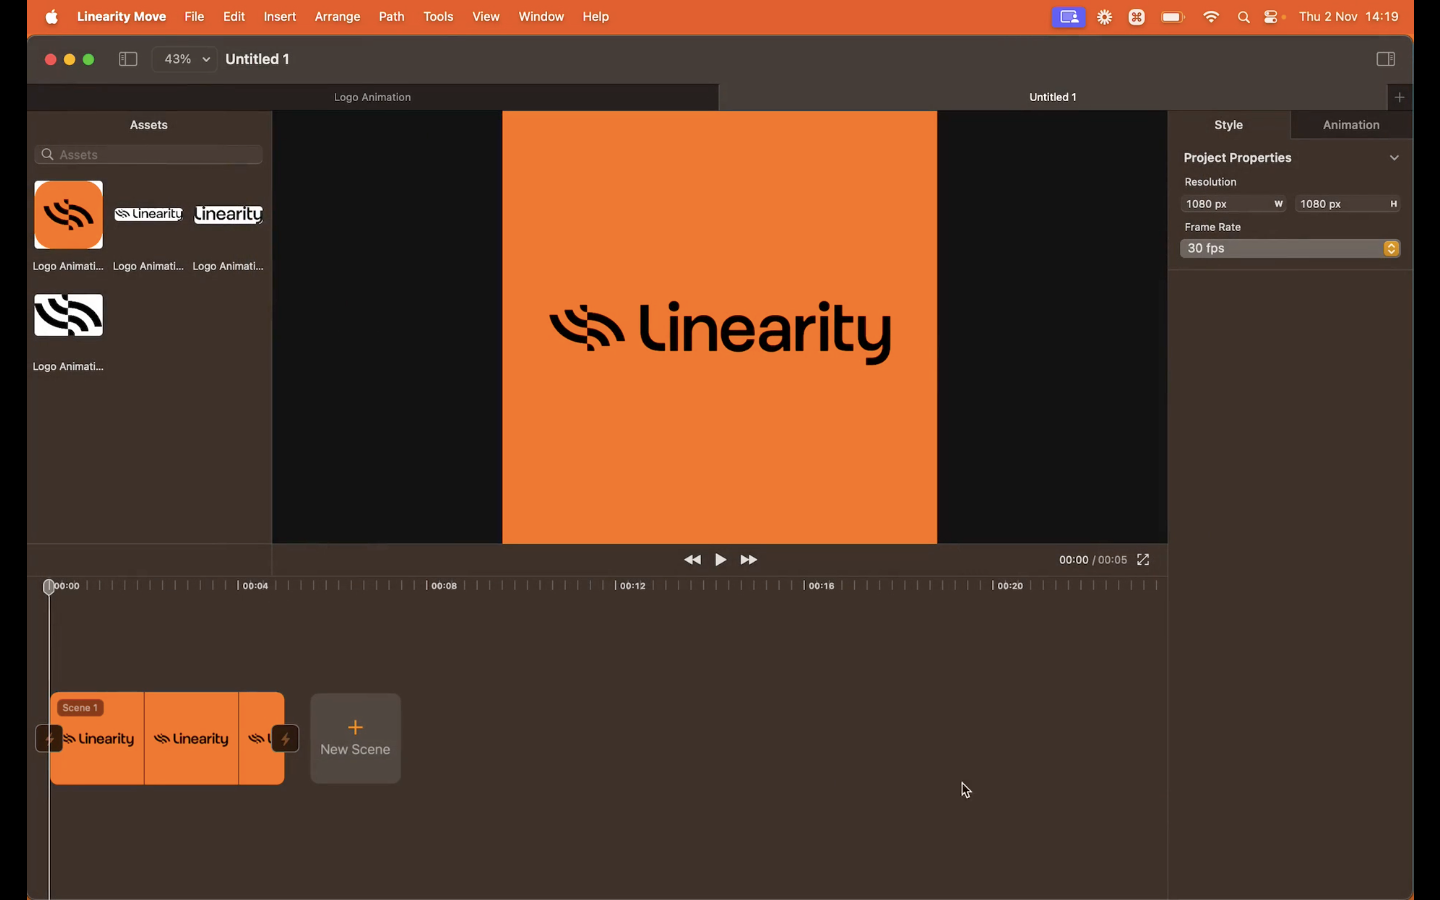 How to animate a logo + linearity + new scene